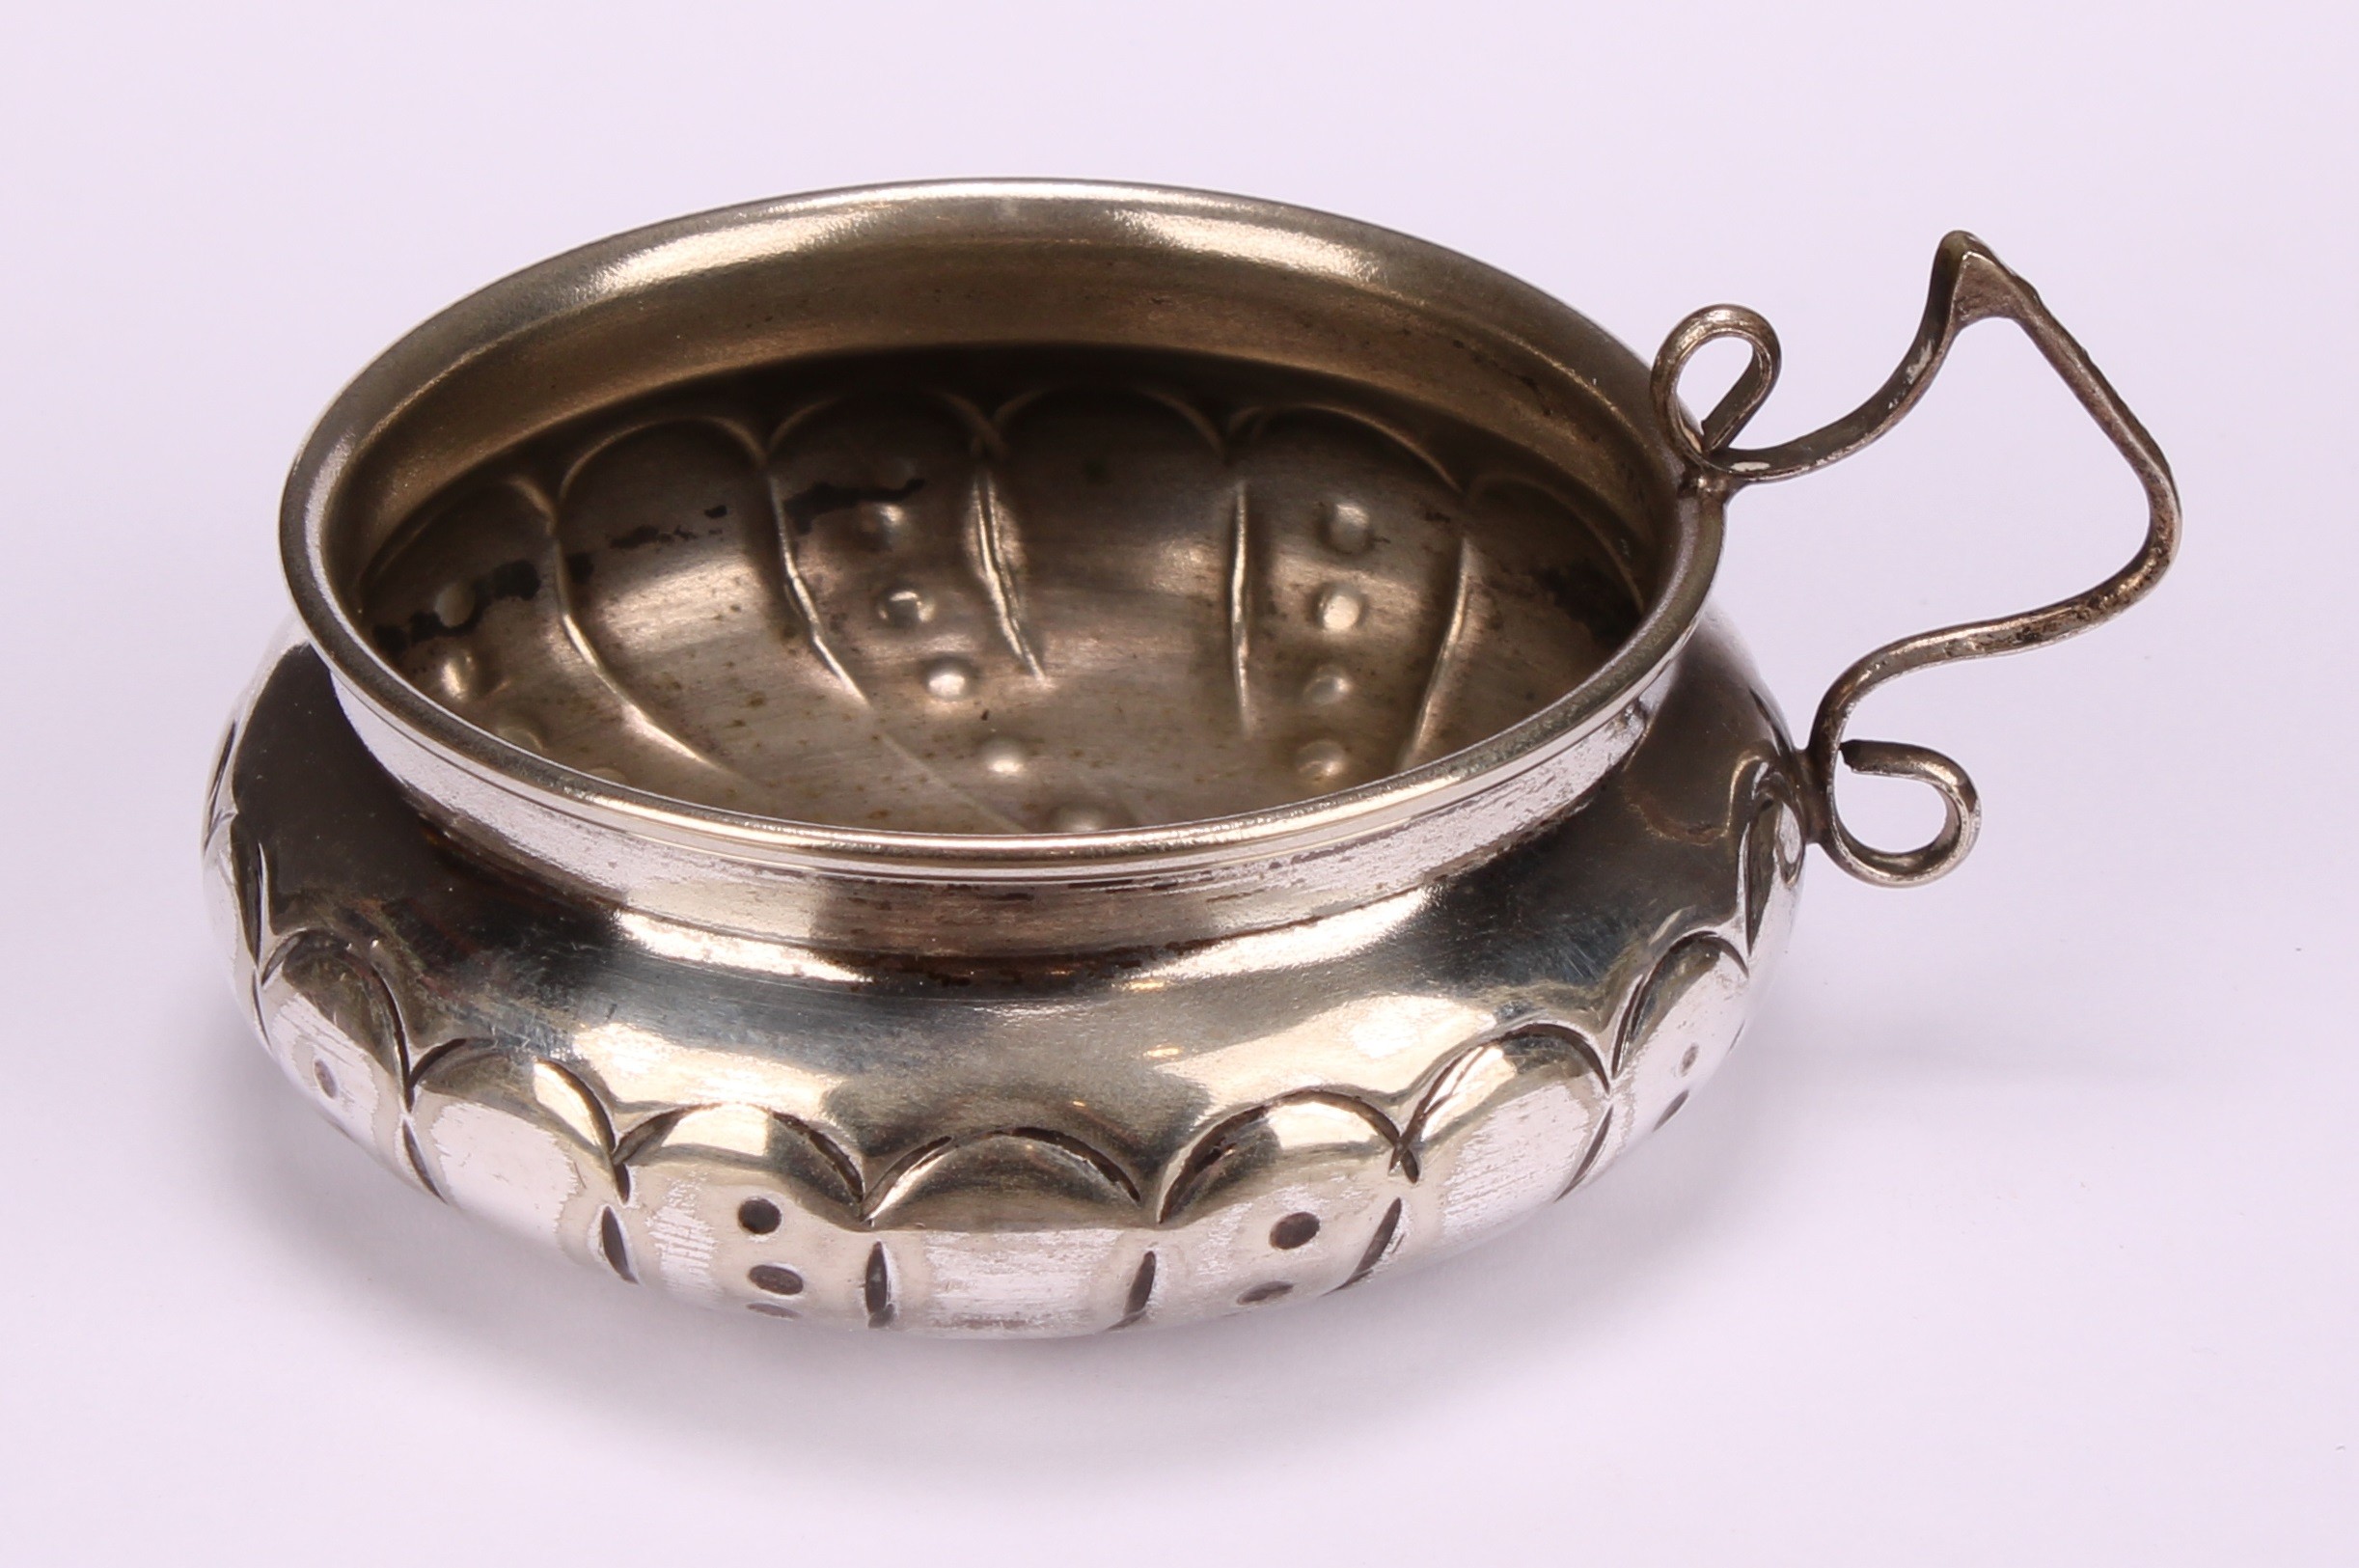 A 19th century Spanish silver wine taster, set with a Charles IV coin, 7cm diam, 54g - Image 2 of 4